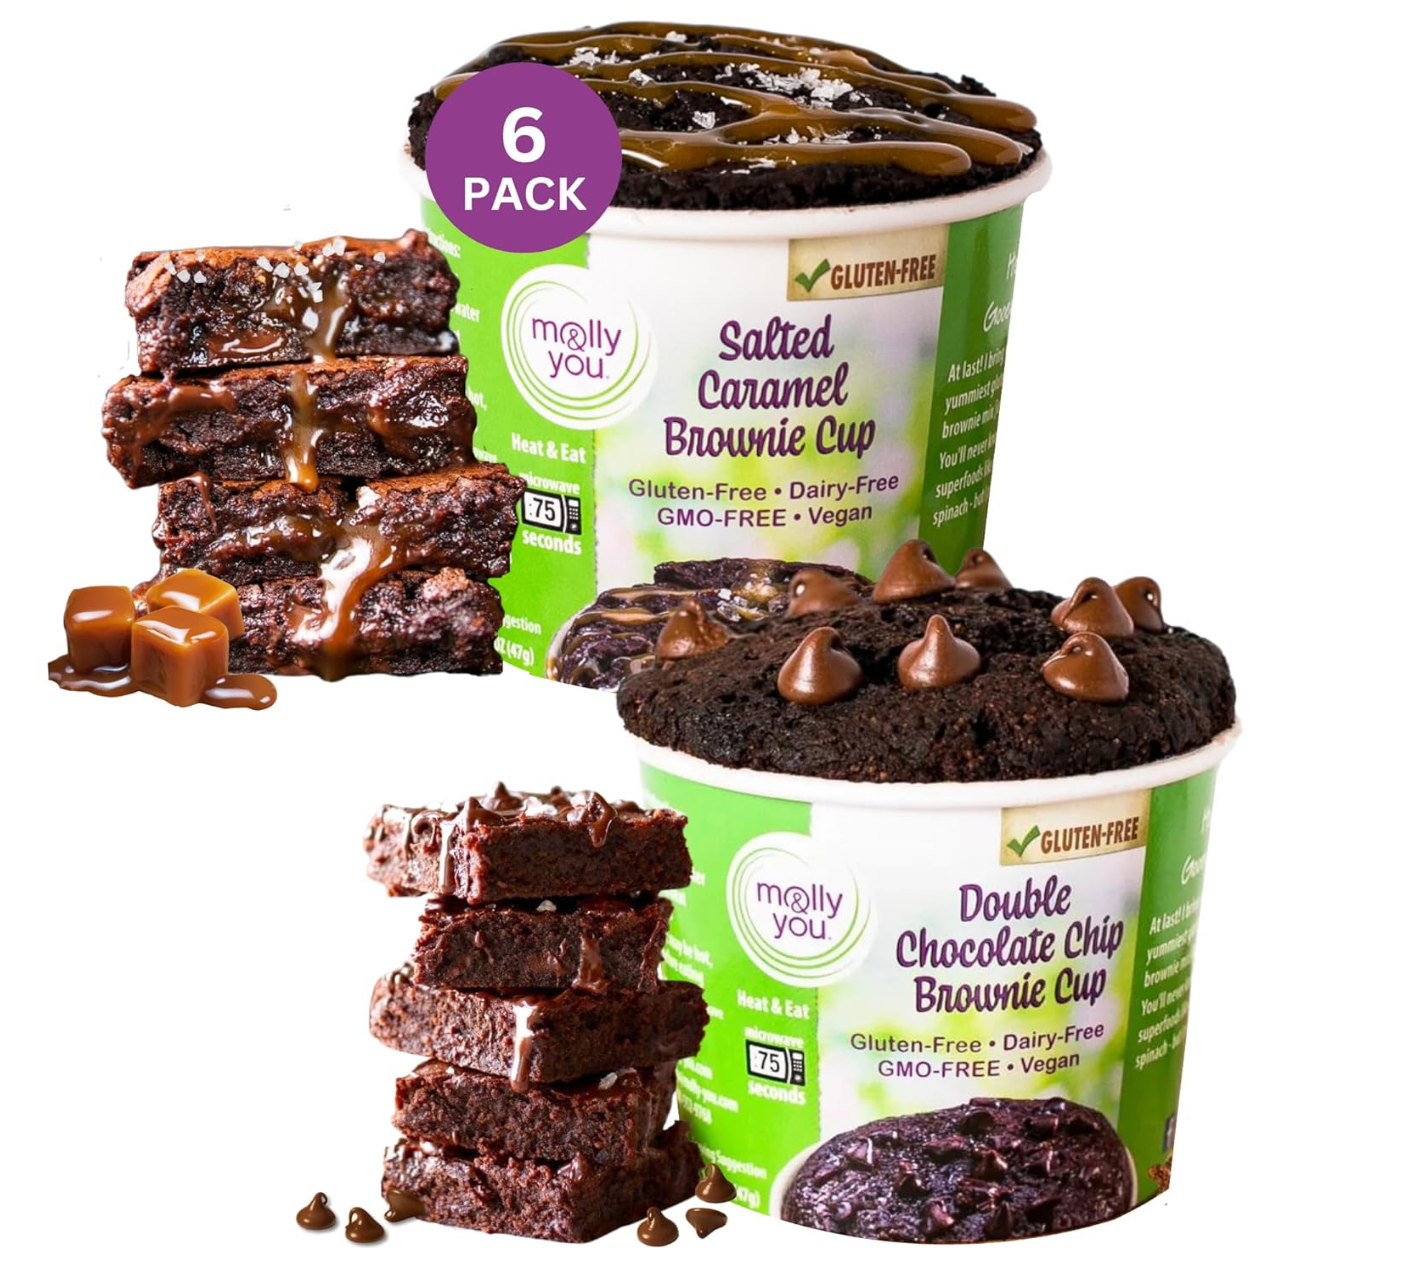 Gluten-Free Salted Caramel Brownie Cup - Double Chocolate Chip Brownie Cup  - 6 Pack< Gluten-Free, Dairy-Free, GMO-Free, Vegas